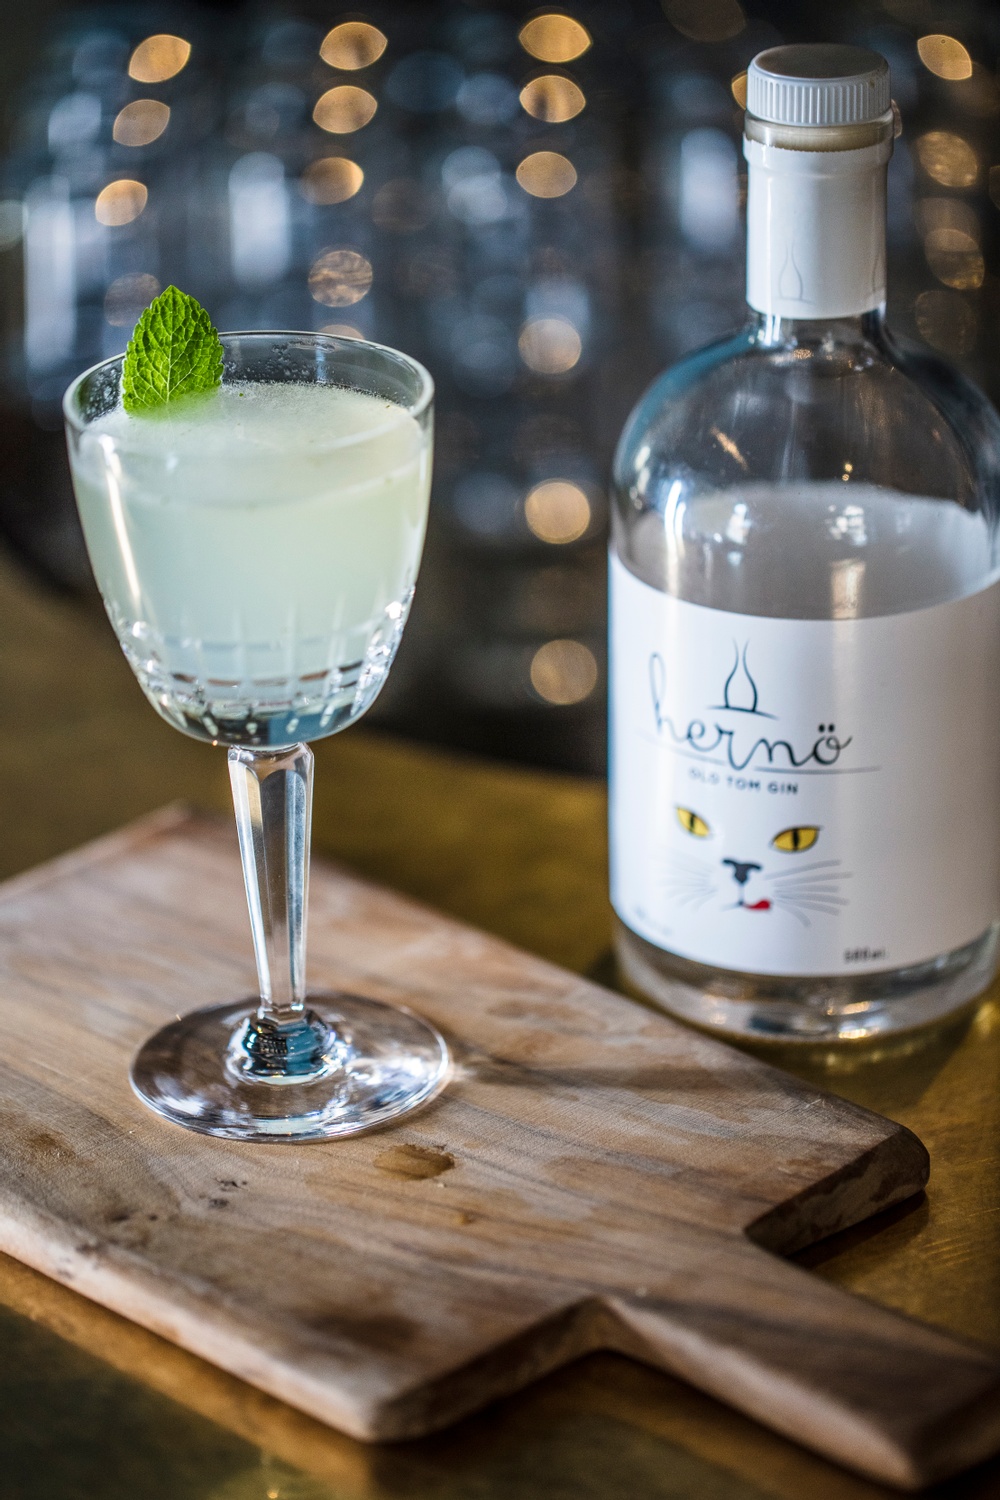 Our smooth cat Hernö Old Tom Gin gives minty South side a sweet caresse that makes it very palatable. This is really the death of Mojito.

Ingredients:
50 ml Hernö Old Tom Gin
20 ml lemon juice
20 ml simple syrup
5 sprigs of mint

Preparation:
Pour Hernö Old Tom Gin, lemon juice, simple syrup and sprigs of mint into a shaker. Shake everything with ice for about 15 seconds. Fine strain in to a chilled cocktail glass.